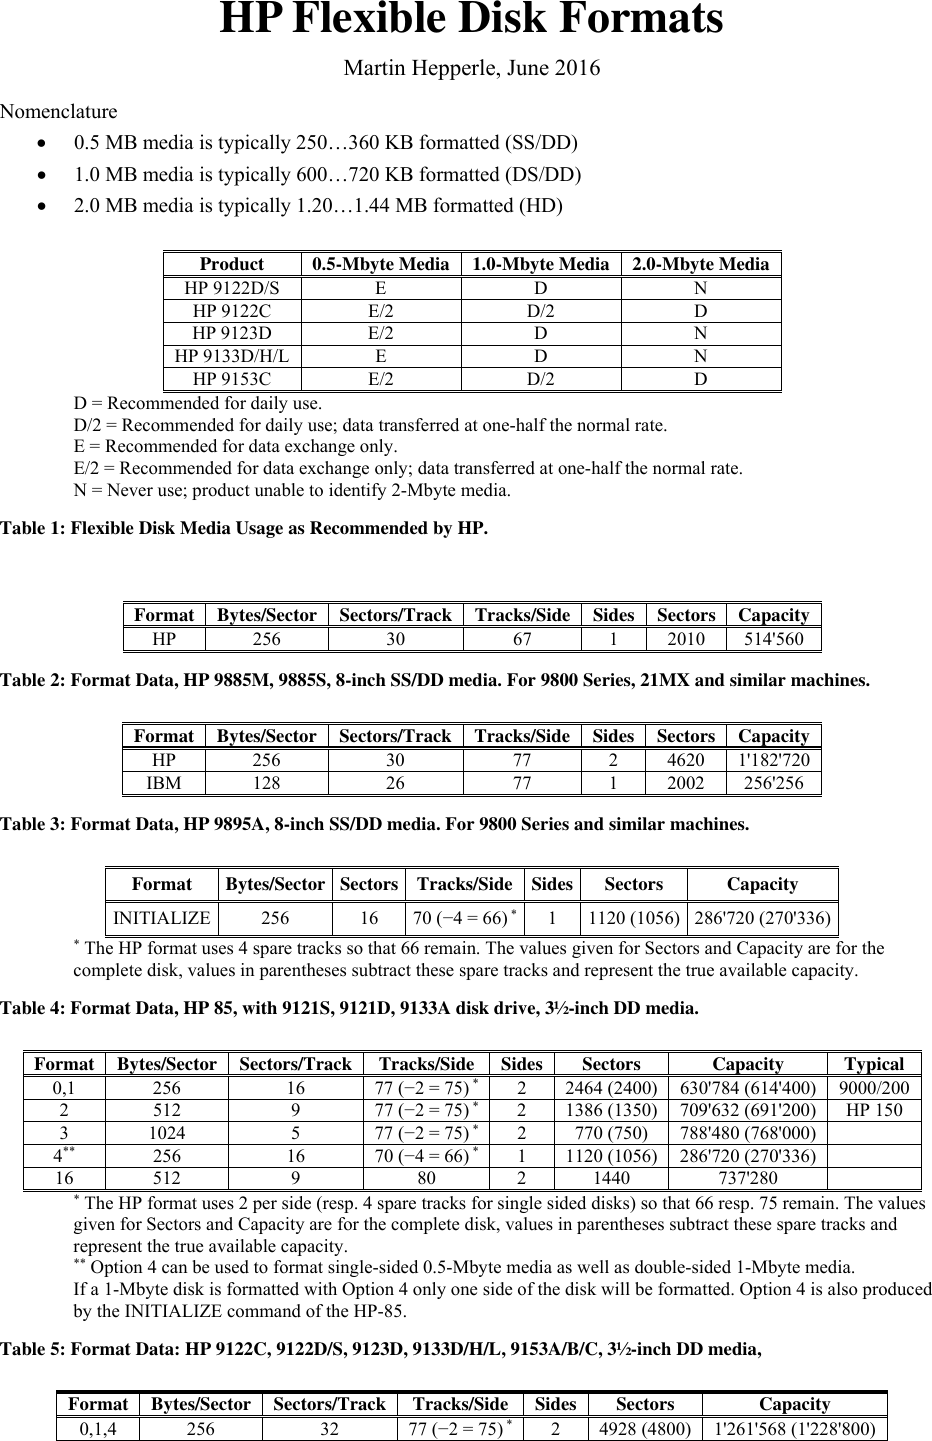 Page 1 of 3 - HP Flexible Disk Formatsx Formats